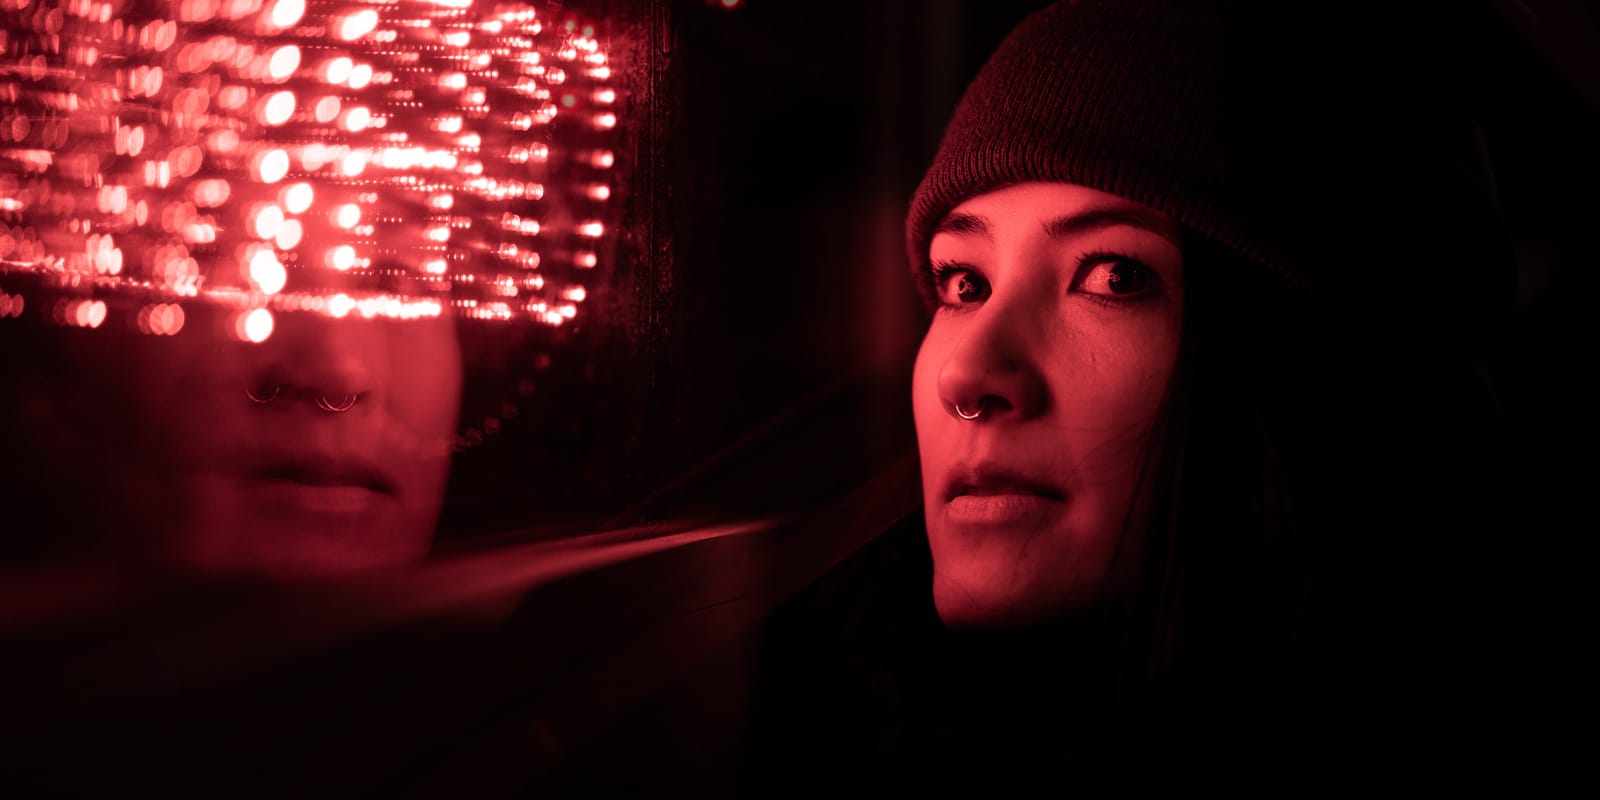 An image with red light flashing on a woman's face